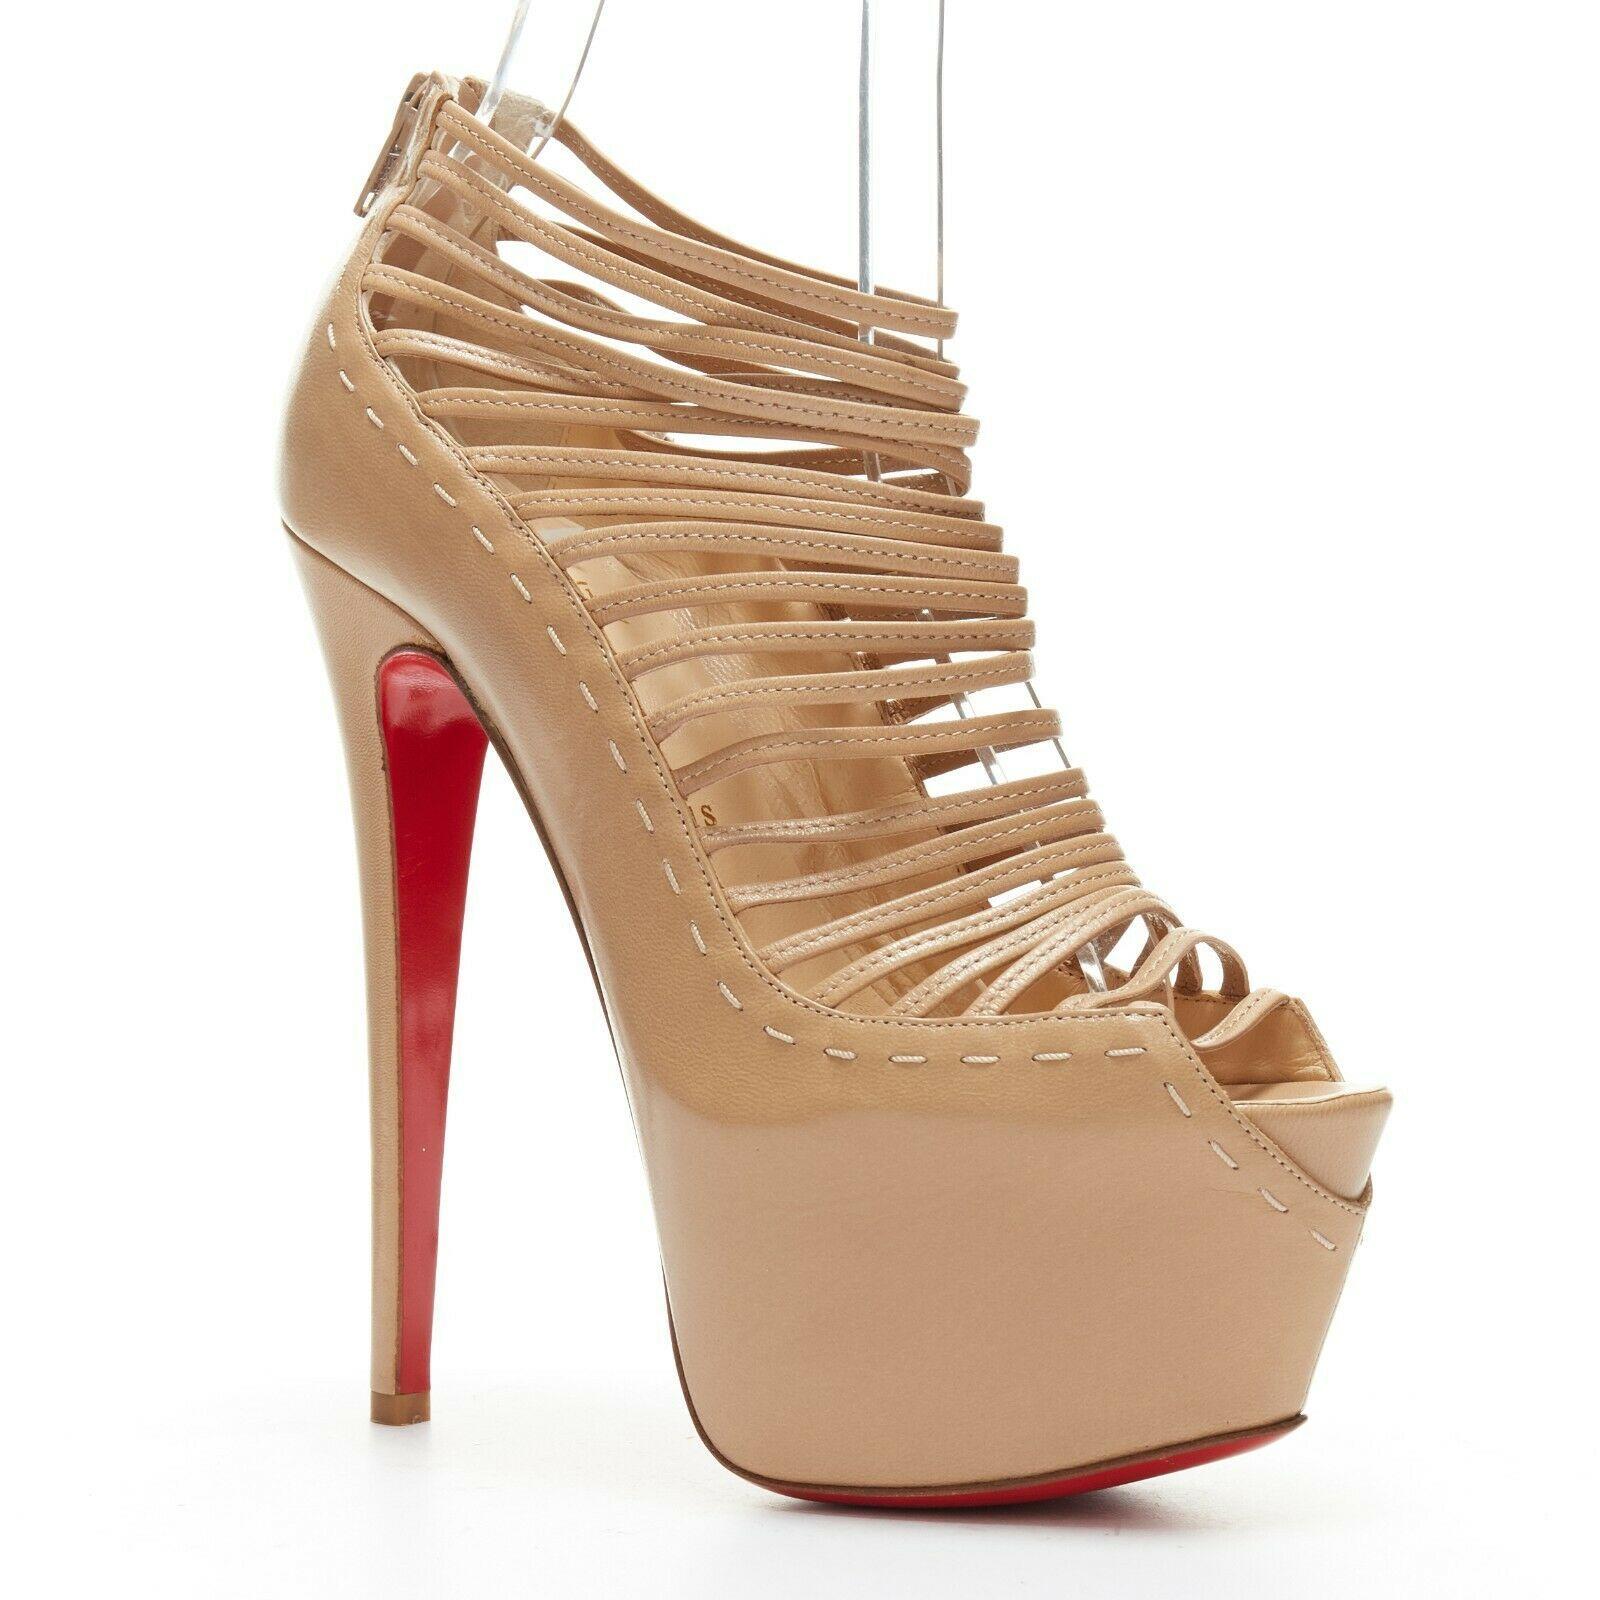 CHRISTIAN LOUBOUTIN Zoulou nude leather strappy peep toe platform pump EU39.5
CHRISTIAN LOUBOUTIN
Zoulou 160. Nude leather upper. Strappy design. Peep toe. 
Tonal overstitching detail. Concealed platform sole. 
Zip back closure. Padded tan leather